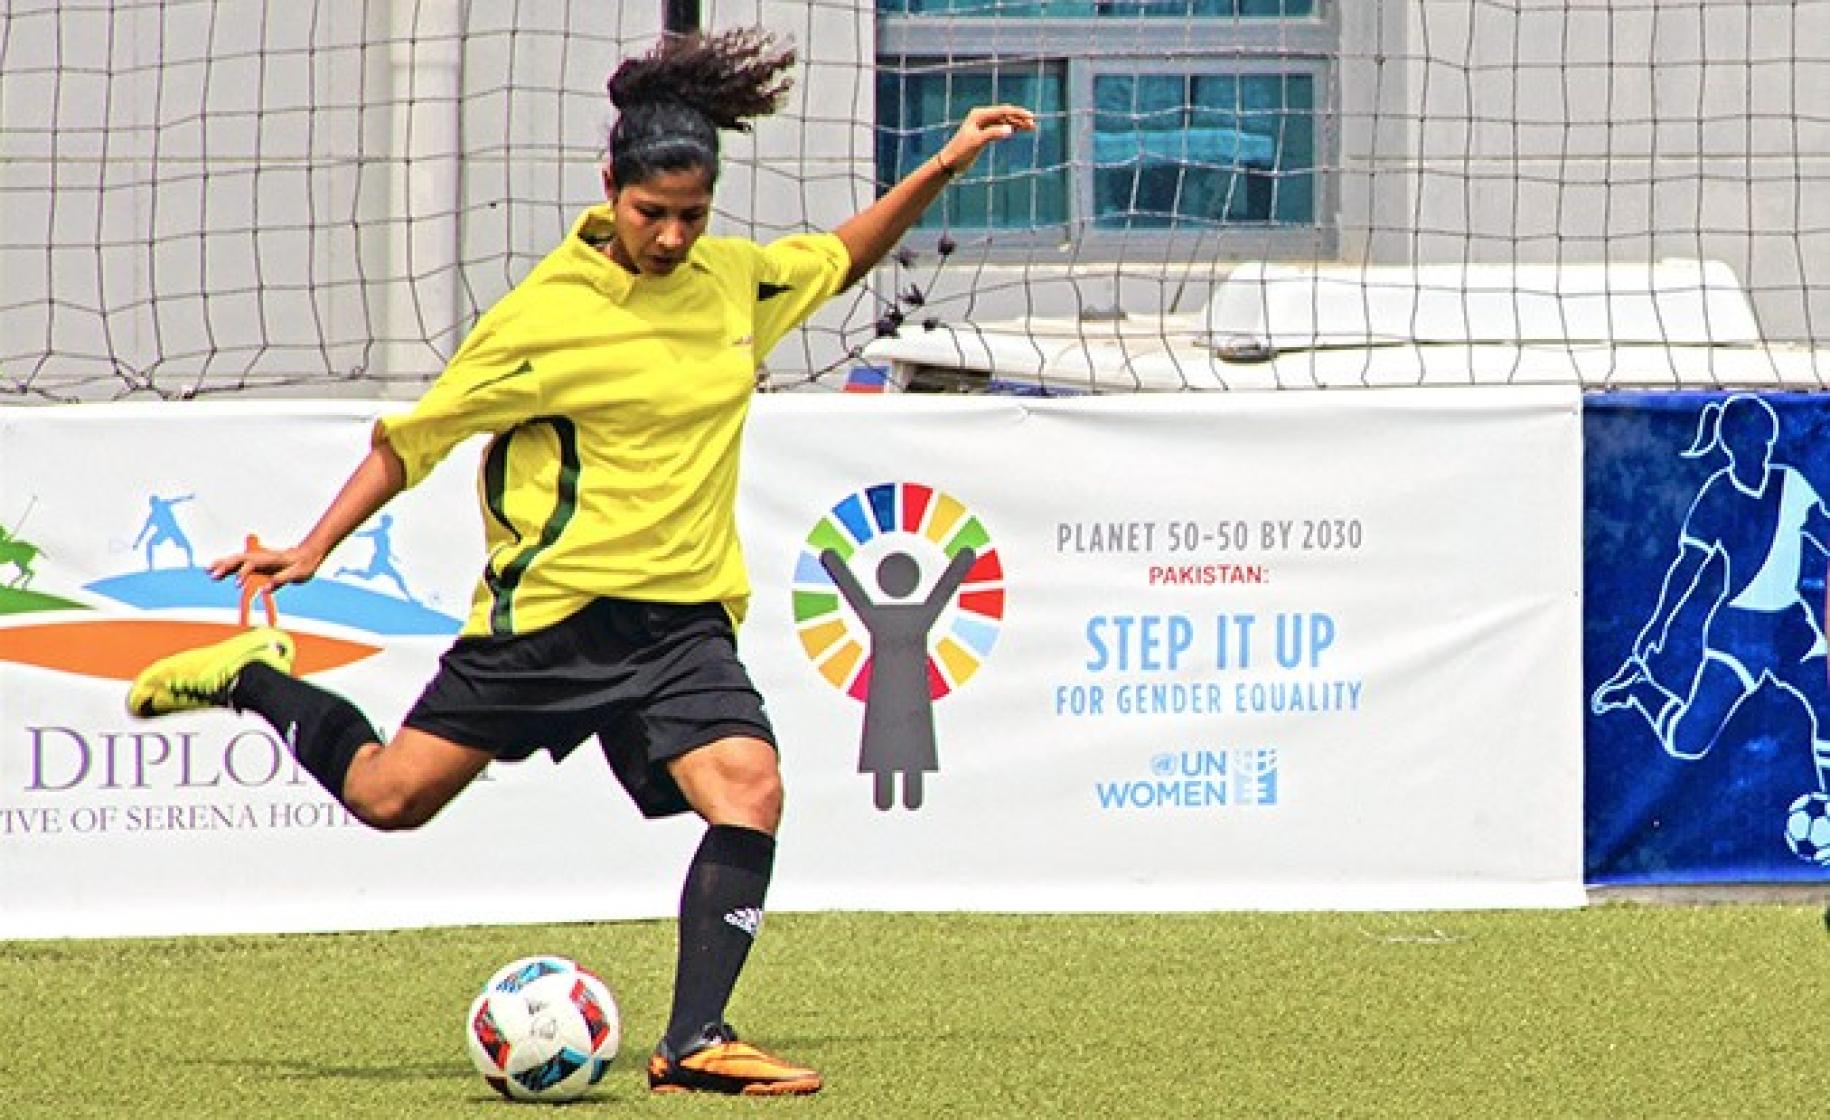 Hajra Khan, team captain of the Female National Football Team of Pakistan, is shown kicking a football during a game.